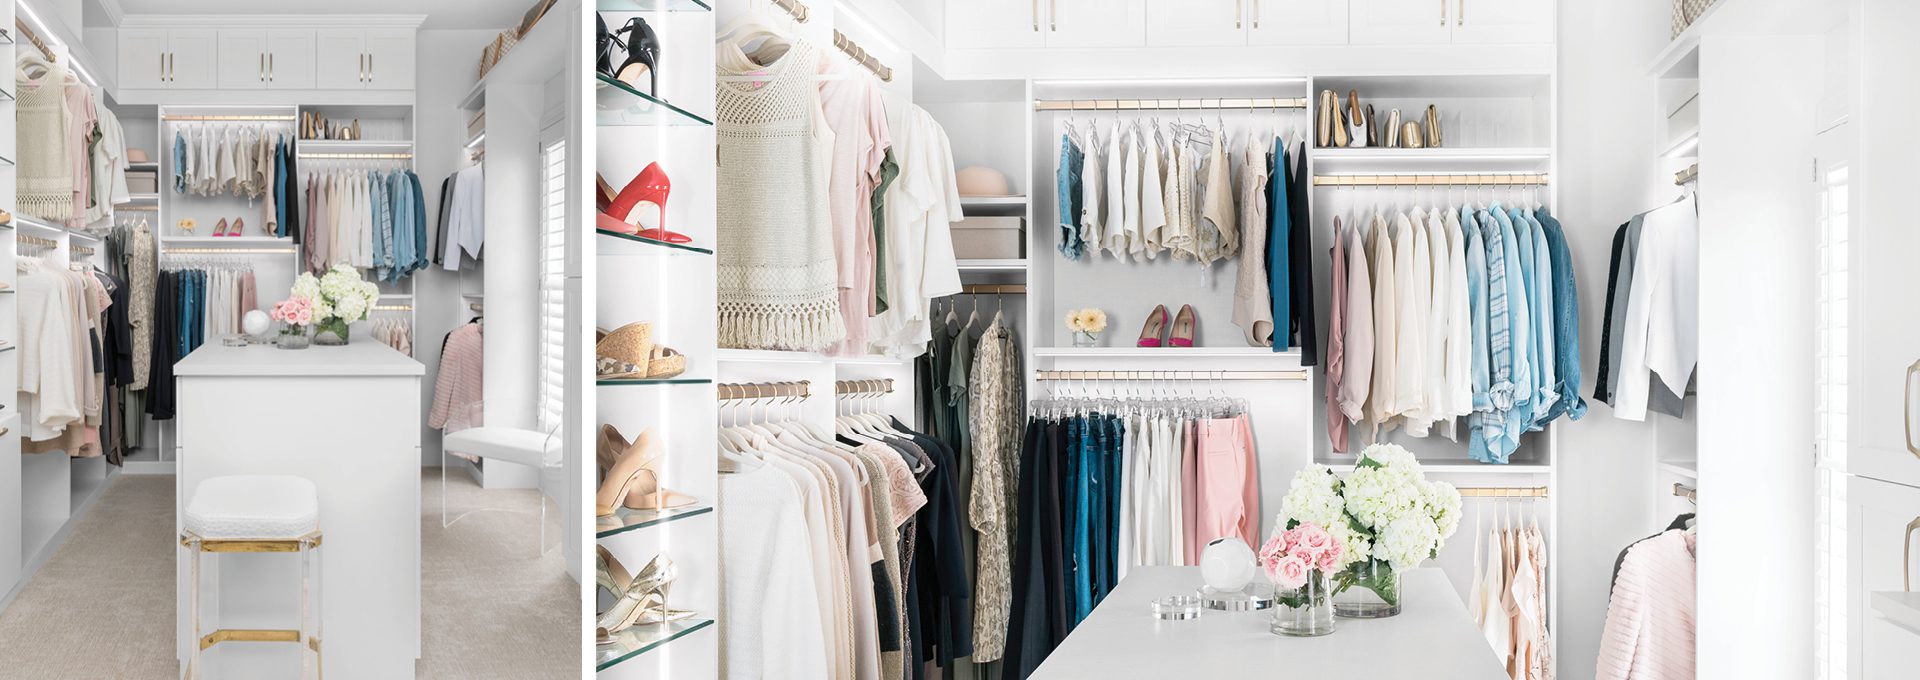 Update your closets, home offices, kitchen pantries and more storage solutions now with the March Upgrade Savings Event from California Closets